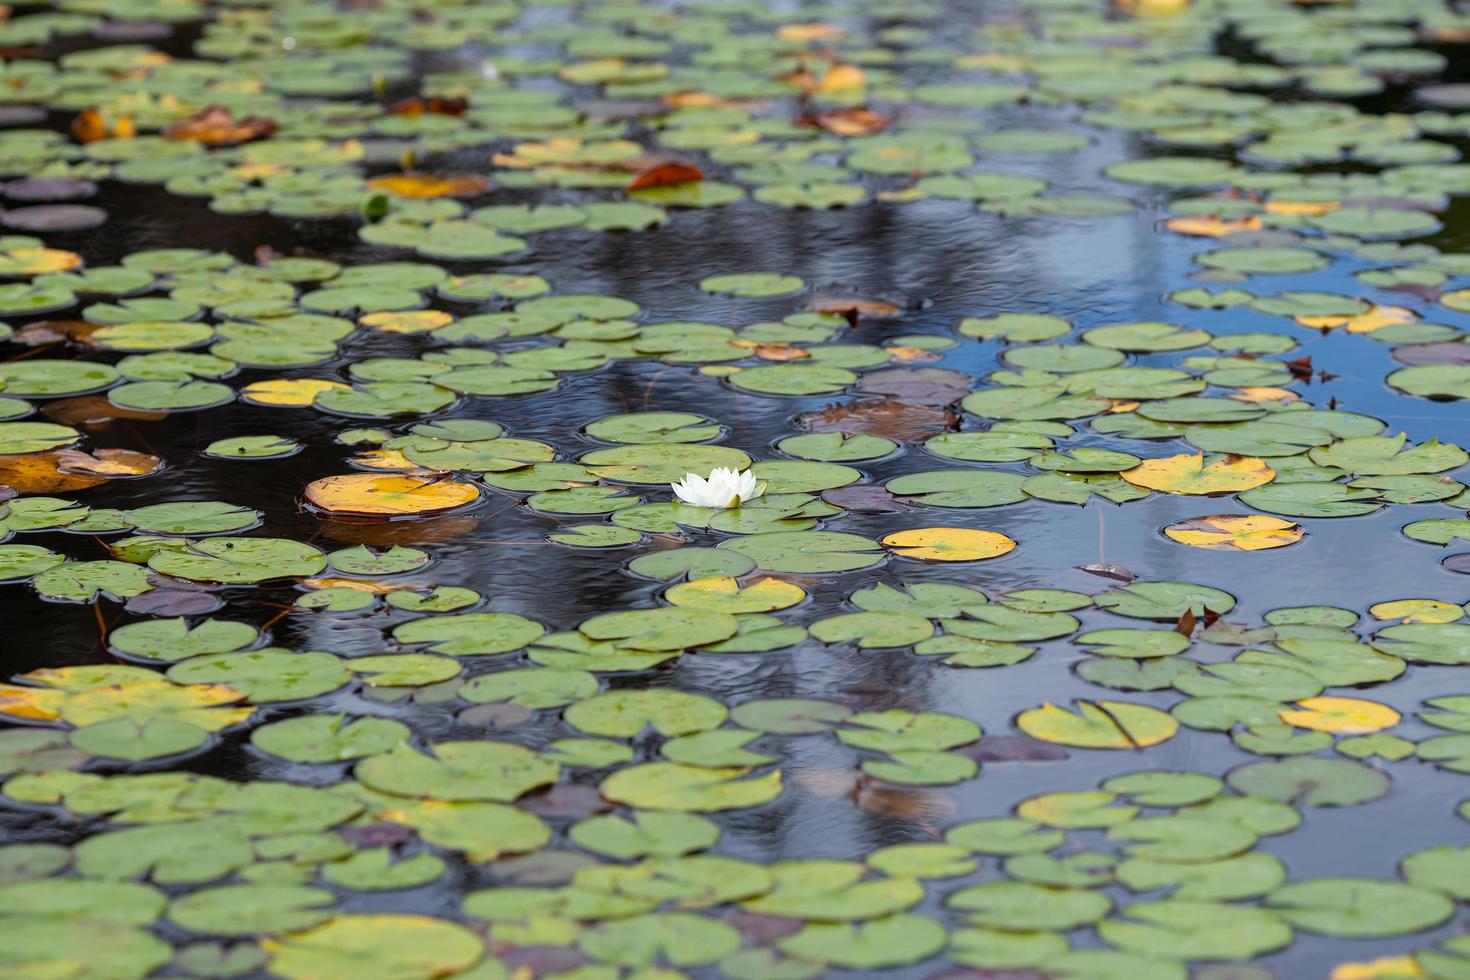 Lilypond with leaf and flower photo